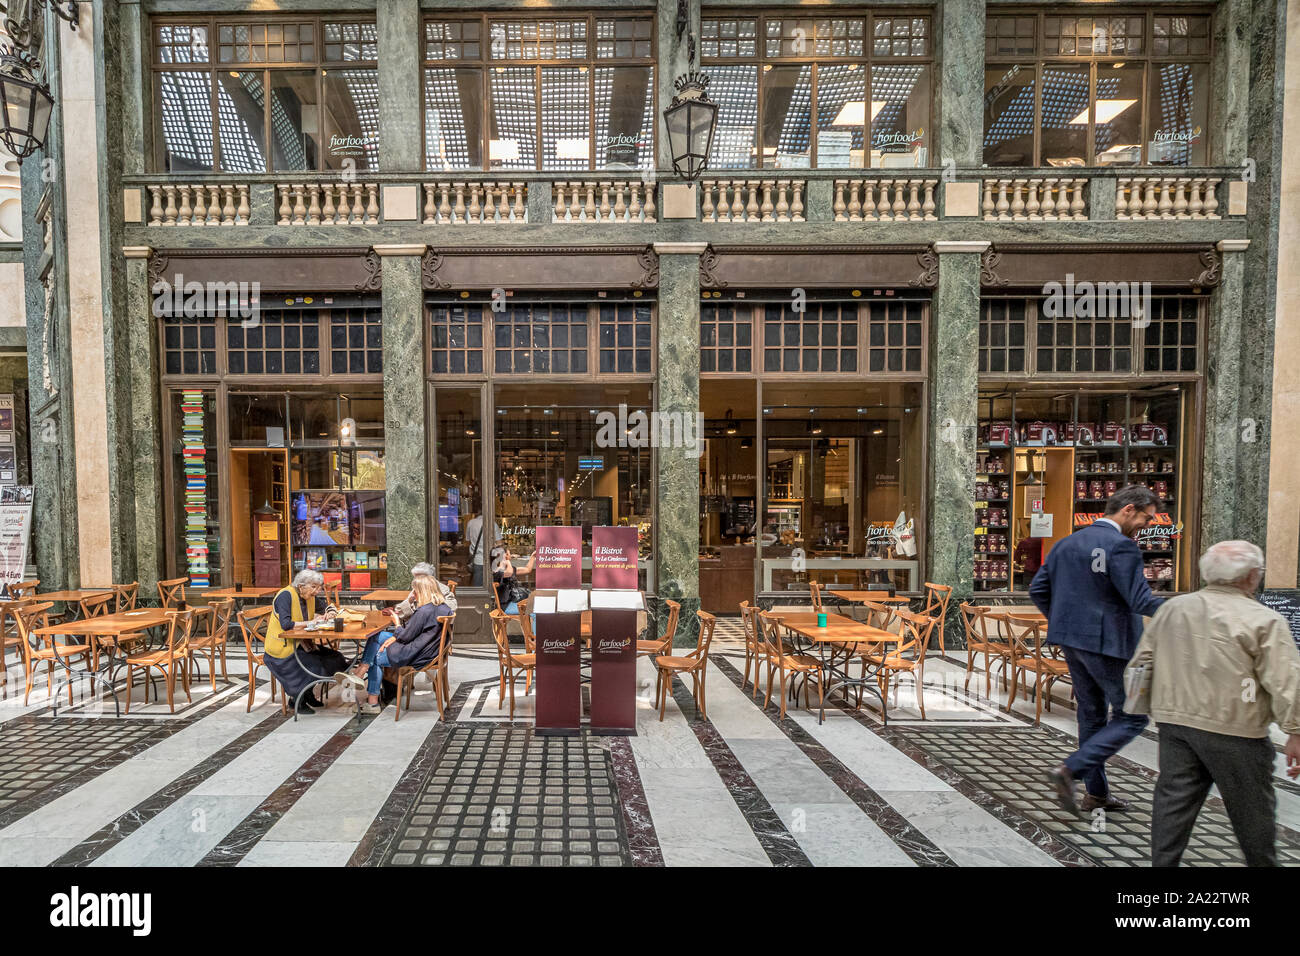 People sitting at tables eating food in the indoor ,art deco,glass ceilinged  arcade ,Galleria San Federico in Turin ,Italy Stock Photo